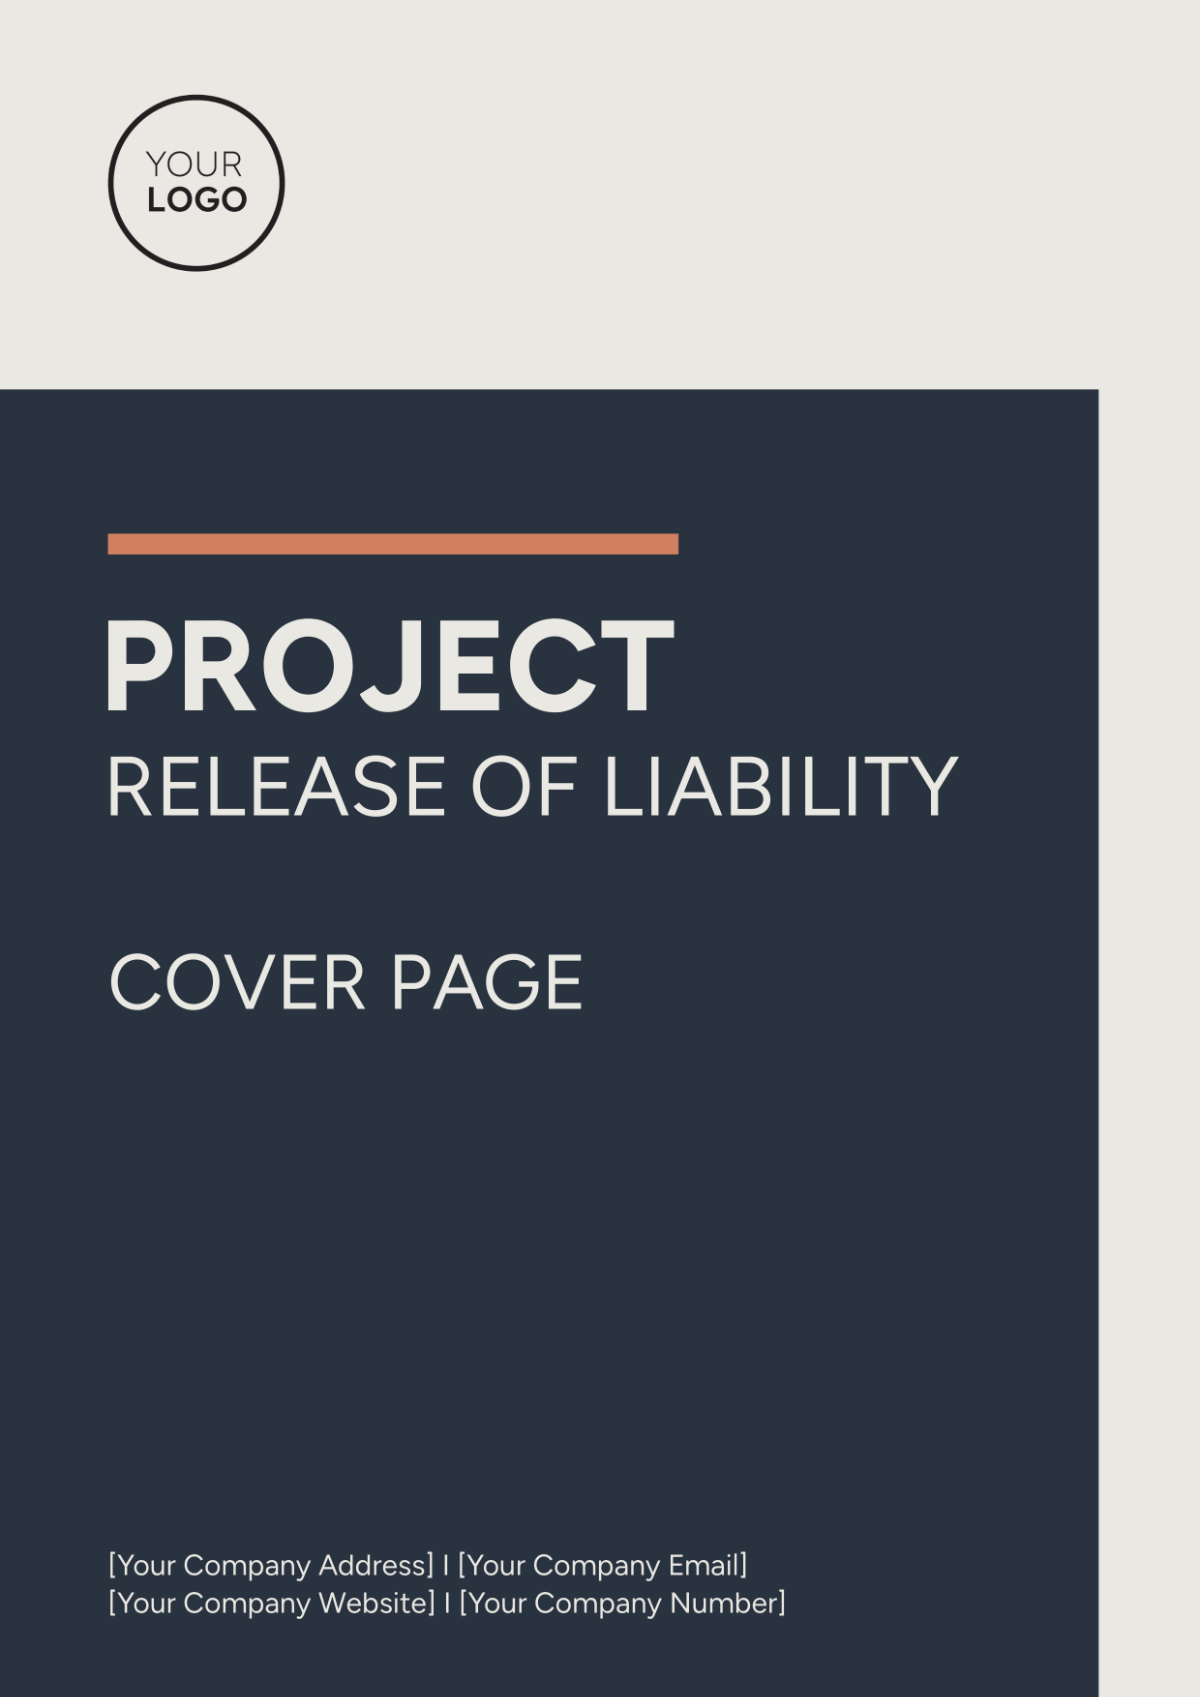 Project Release of Liability Cover Page